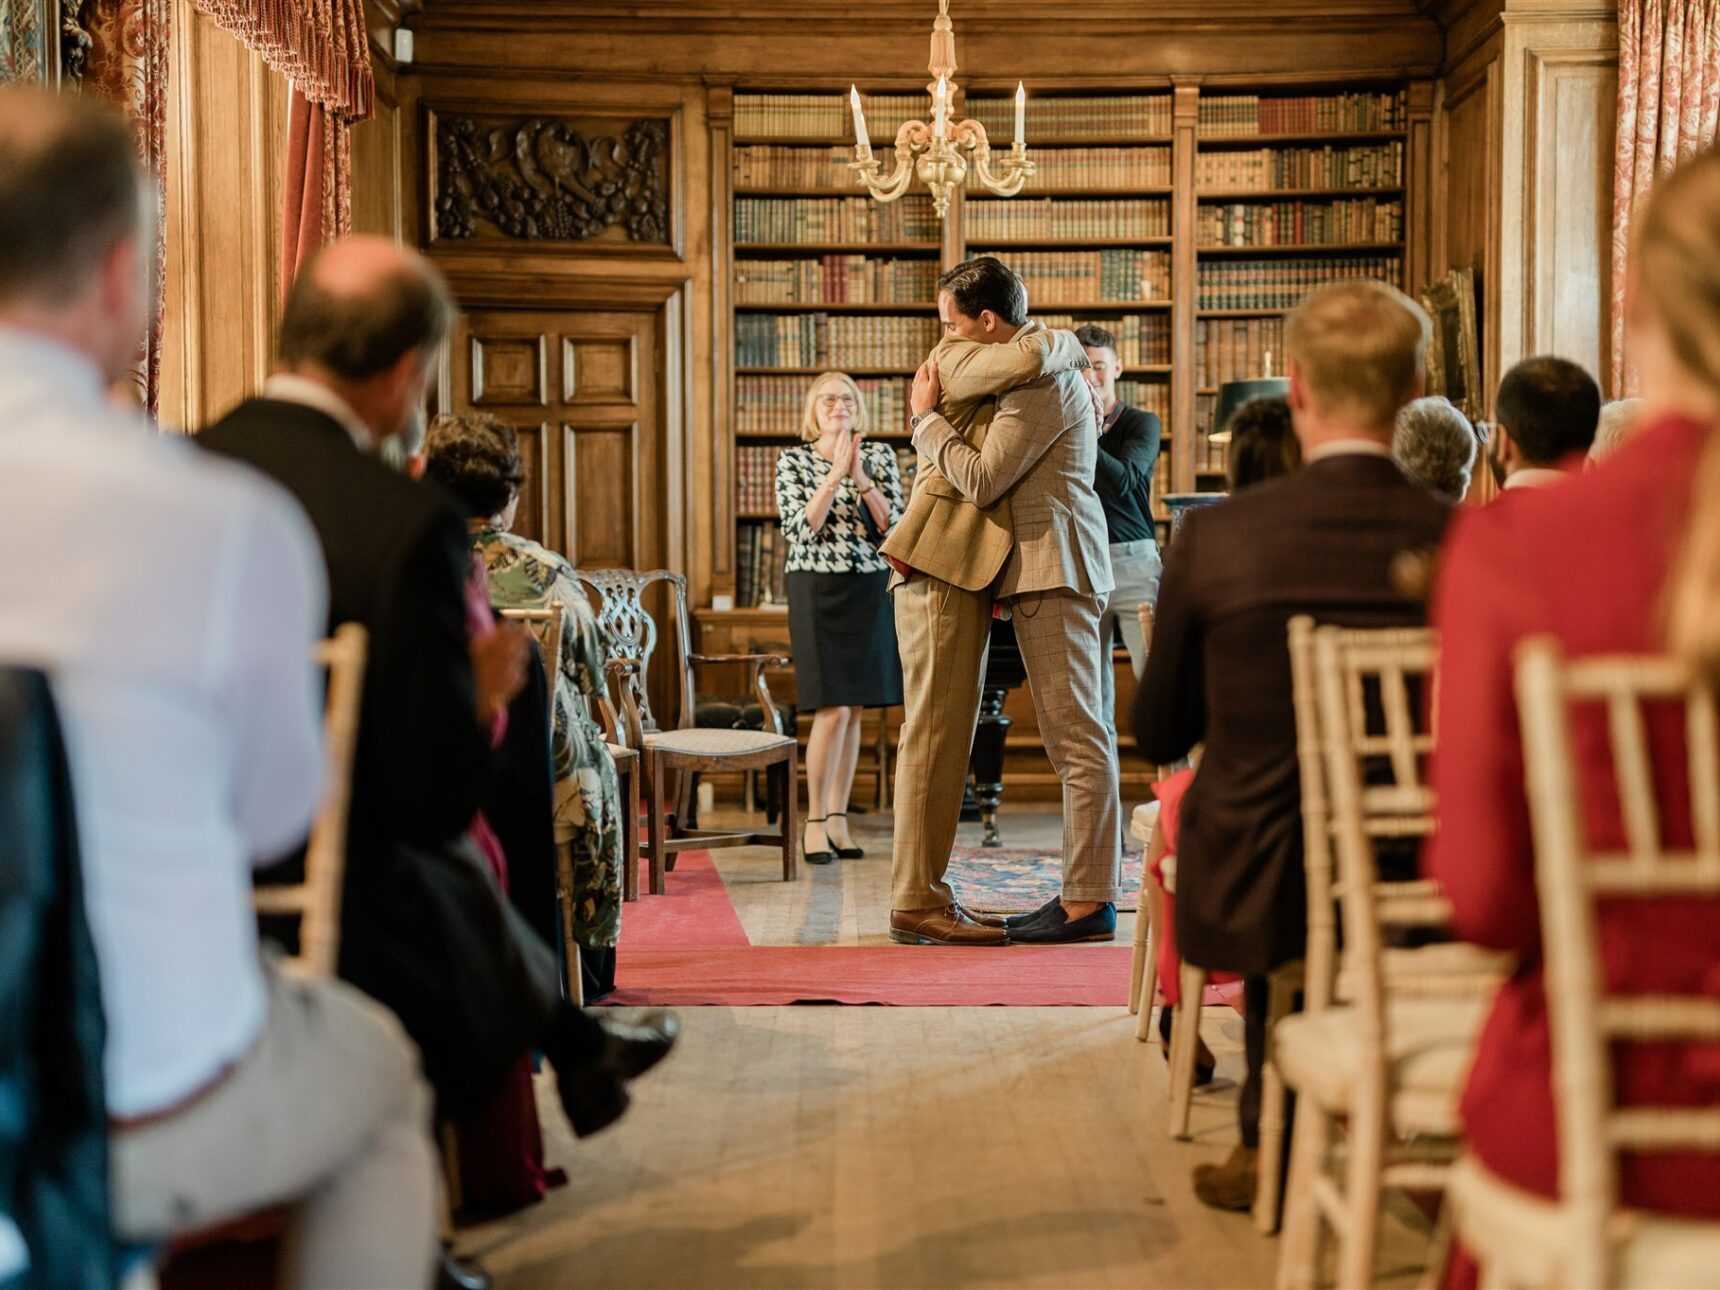 The library is an atmospheric space for your wedding ceremony